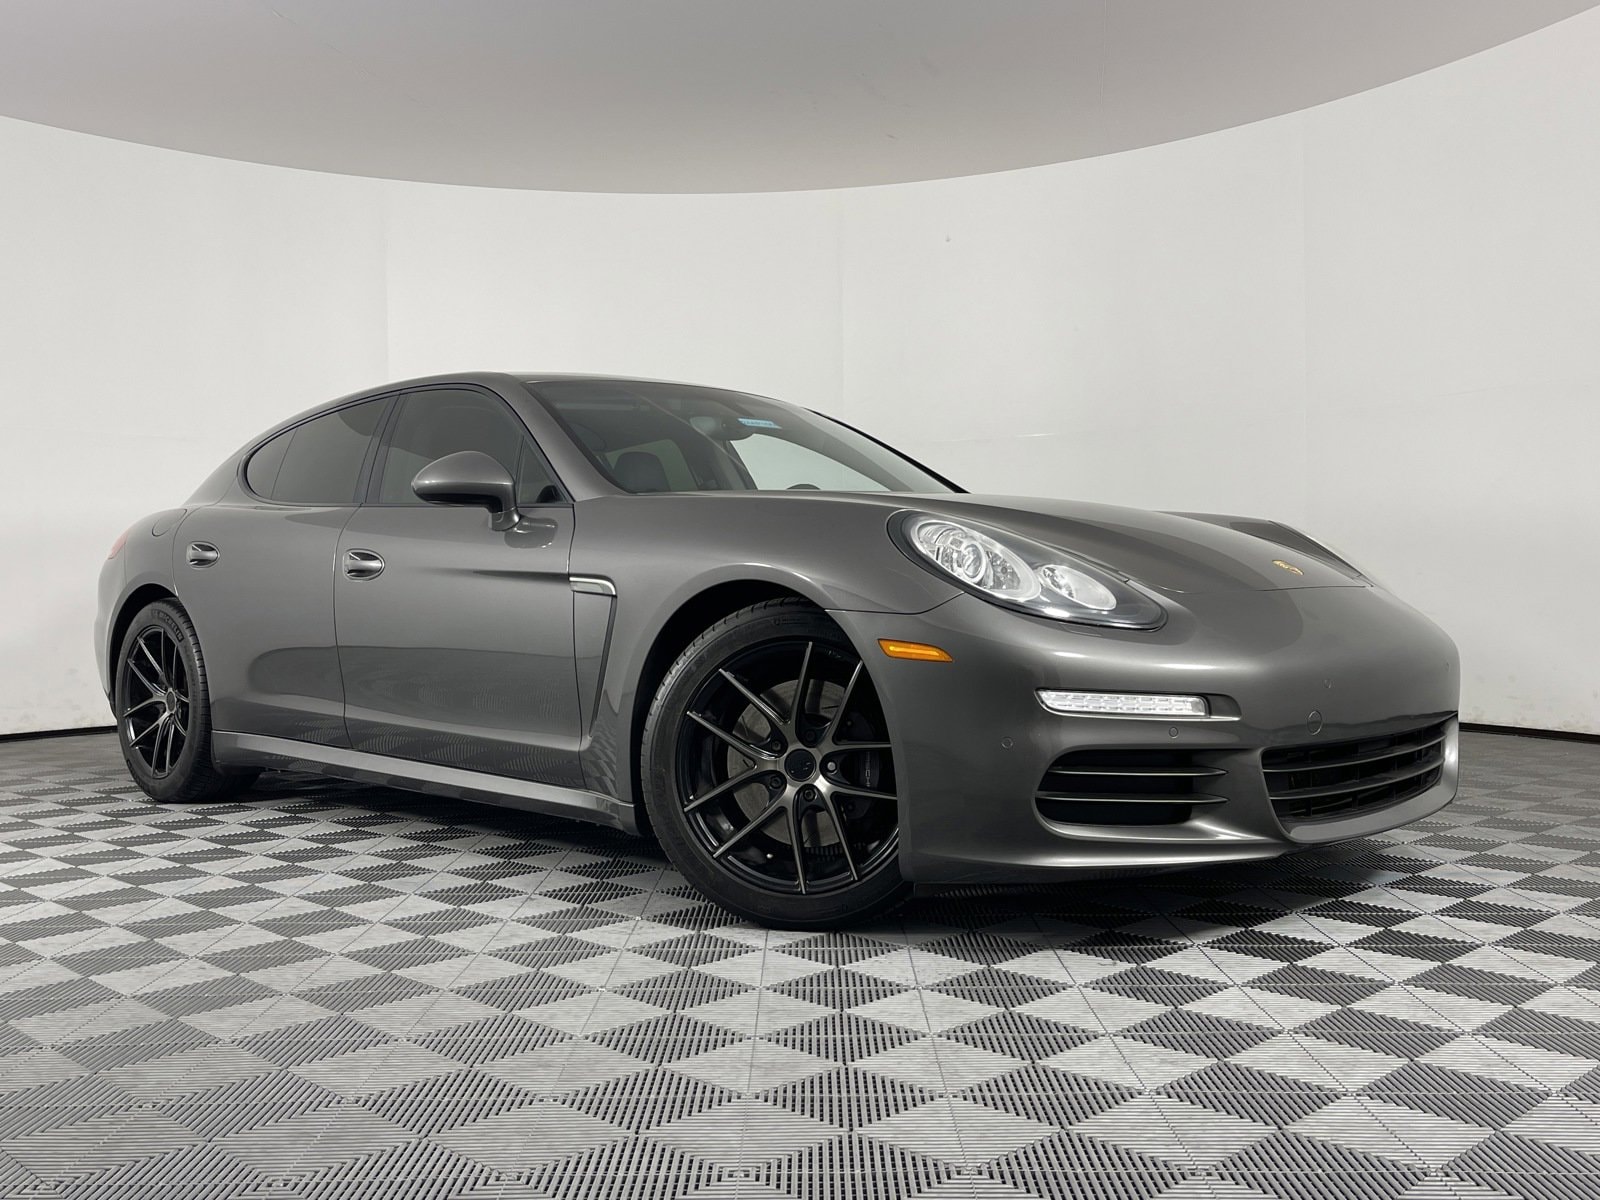 Used 2014 Porsche Panamera Base with VIN WP0AA2A75EL015186 for sale in Fairfield, CA